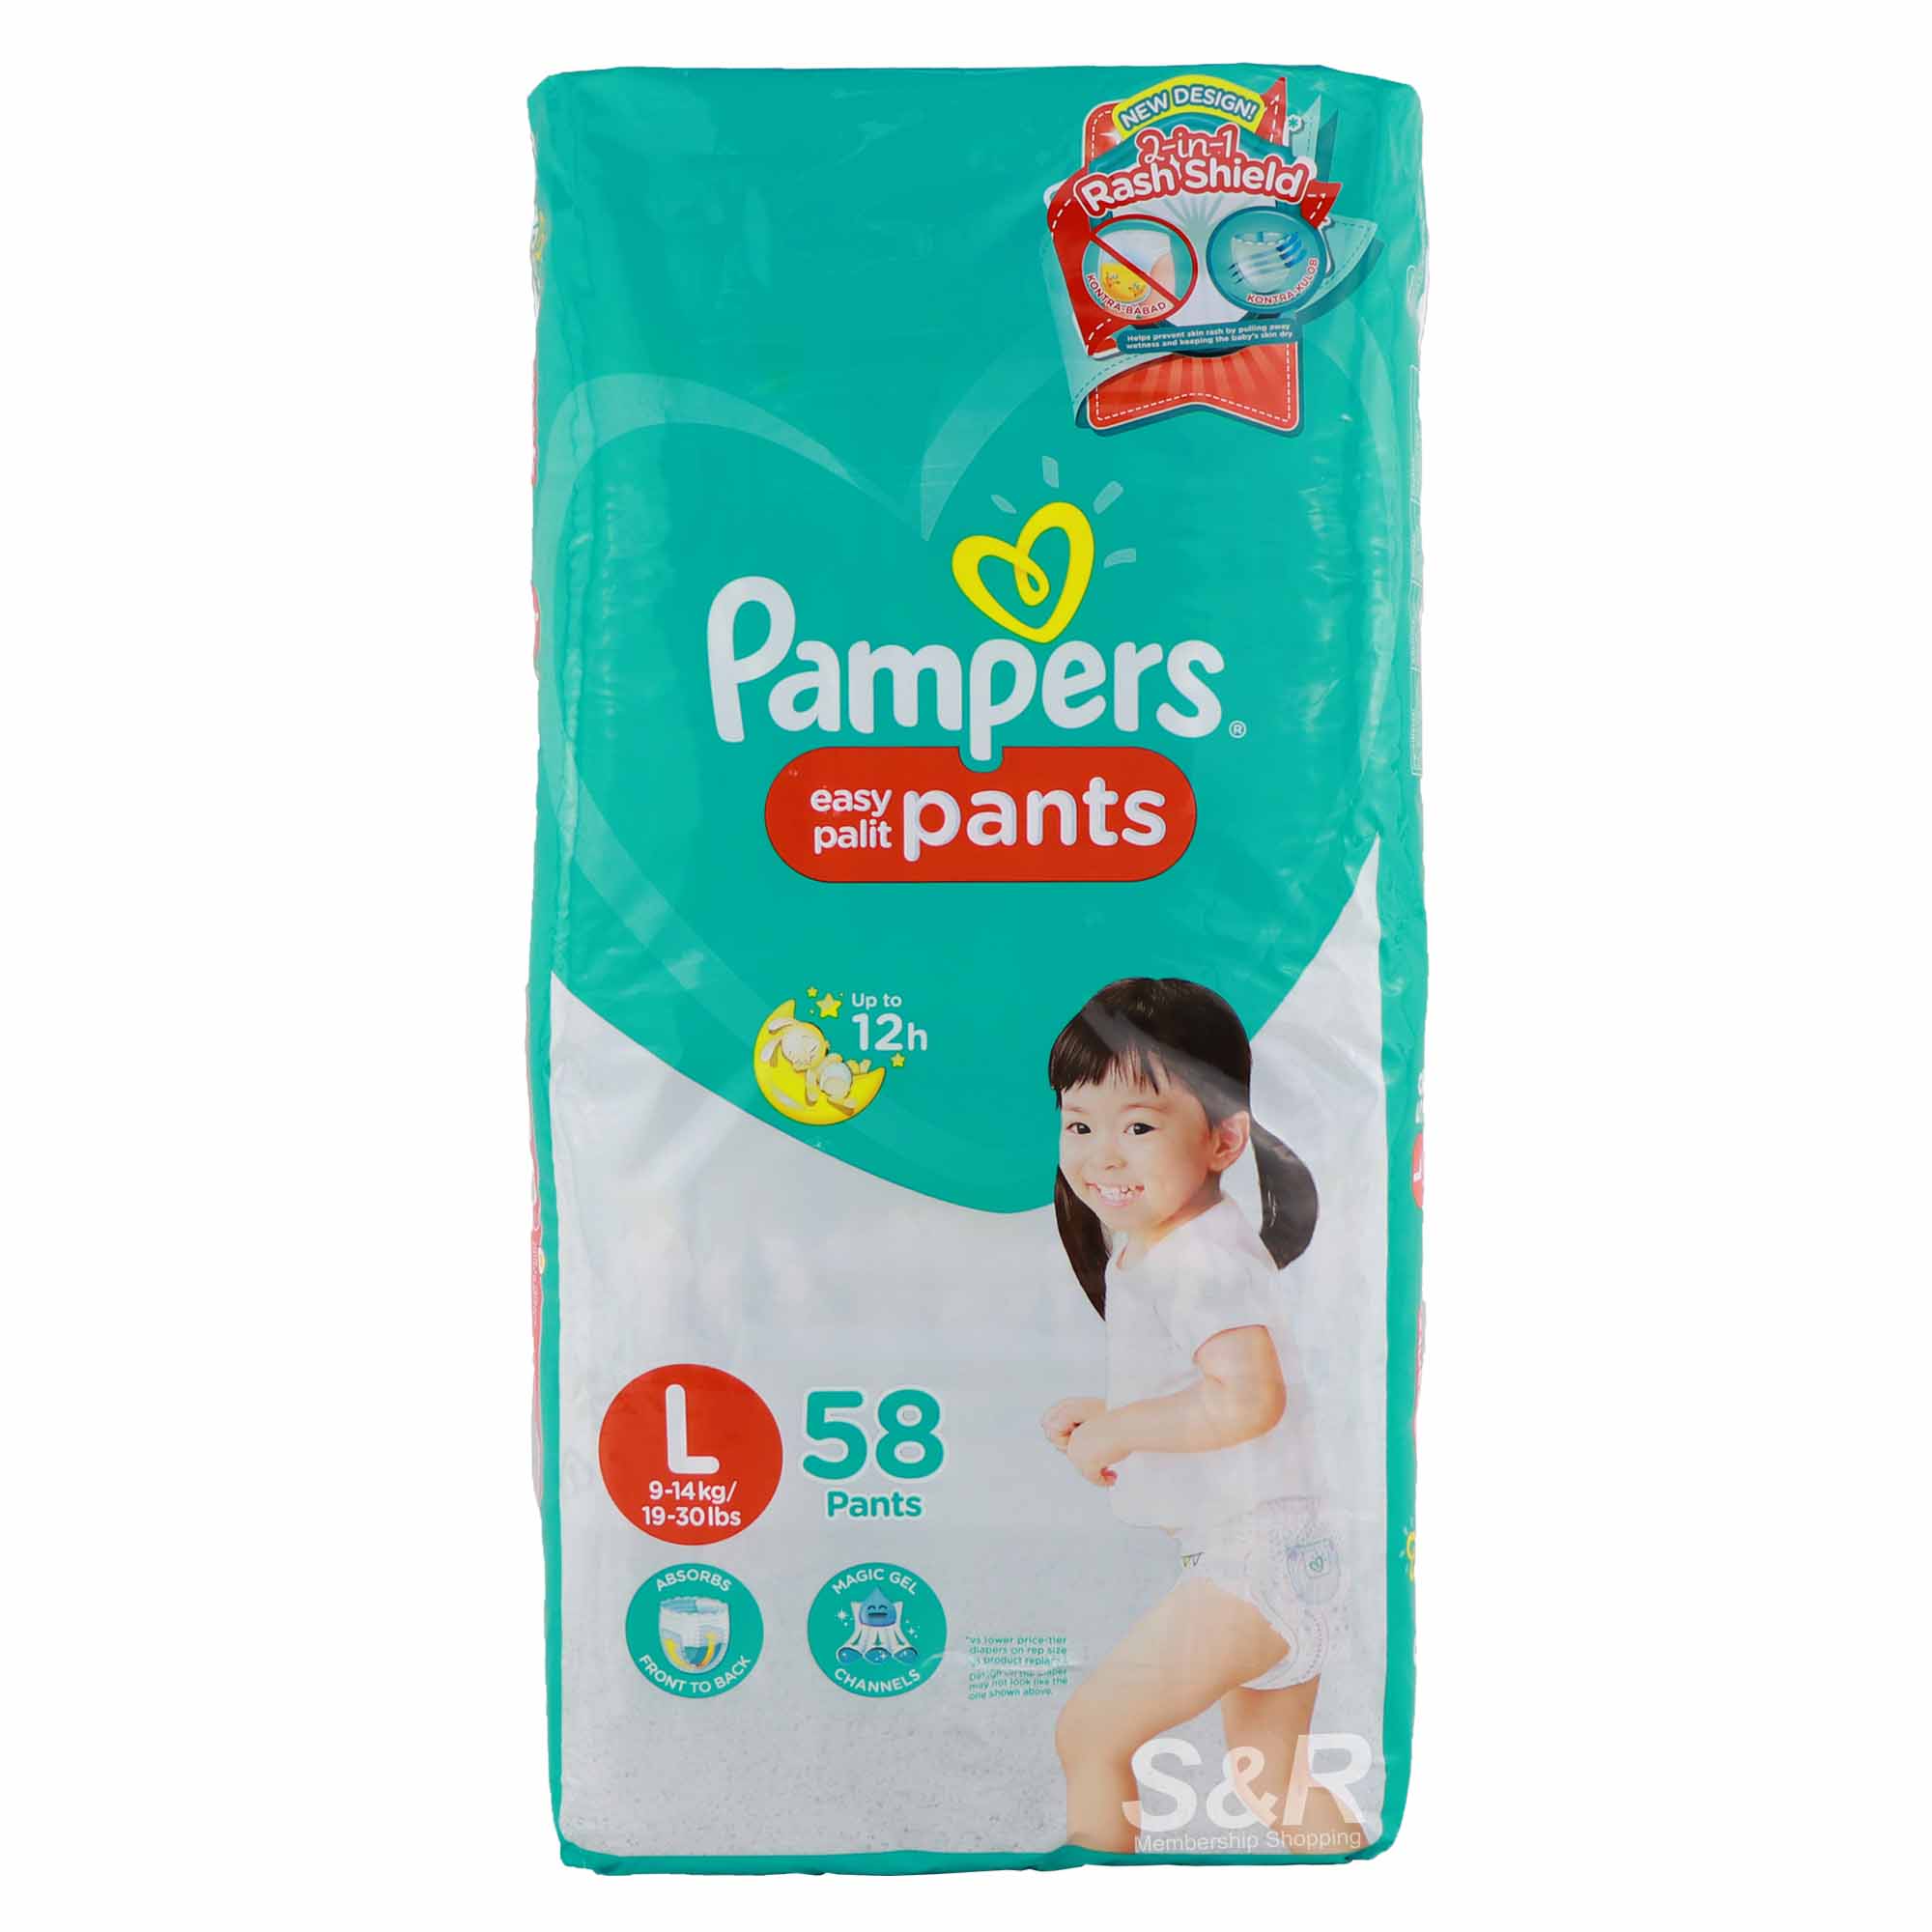 Buy Pampers All round Protection Pants, Large size baby Diapers, (L) 42  Count Lotion with Aloe Vera & Pampers Taped Diapers, Large (LG), 18 count  for Kids Online at Low Prices in